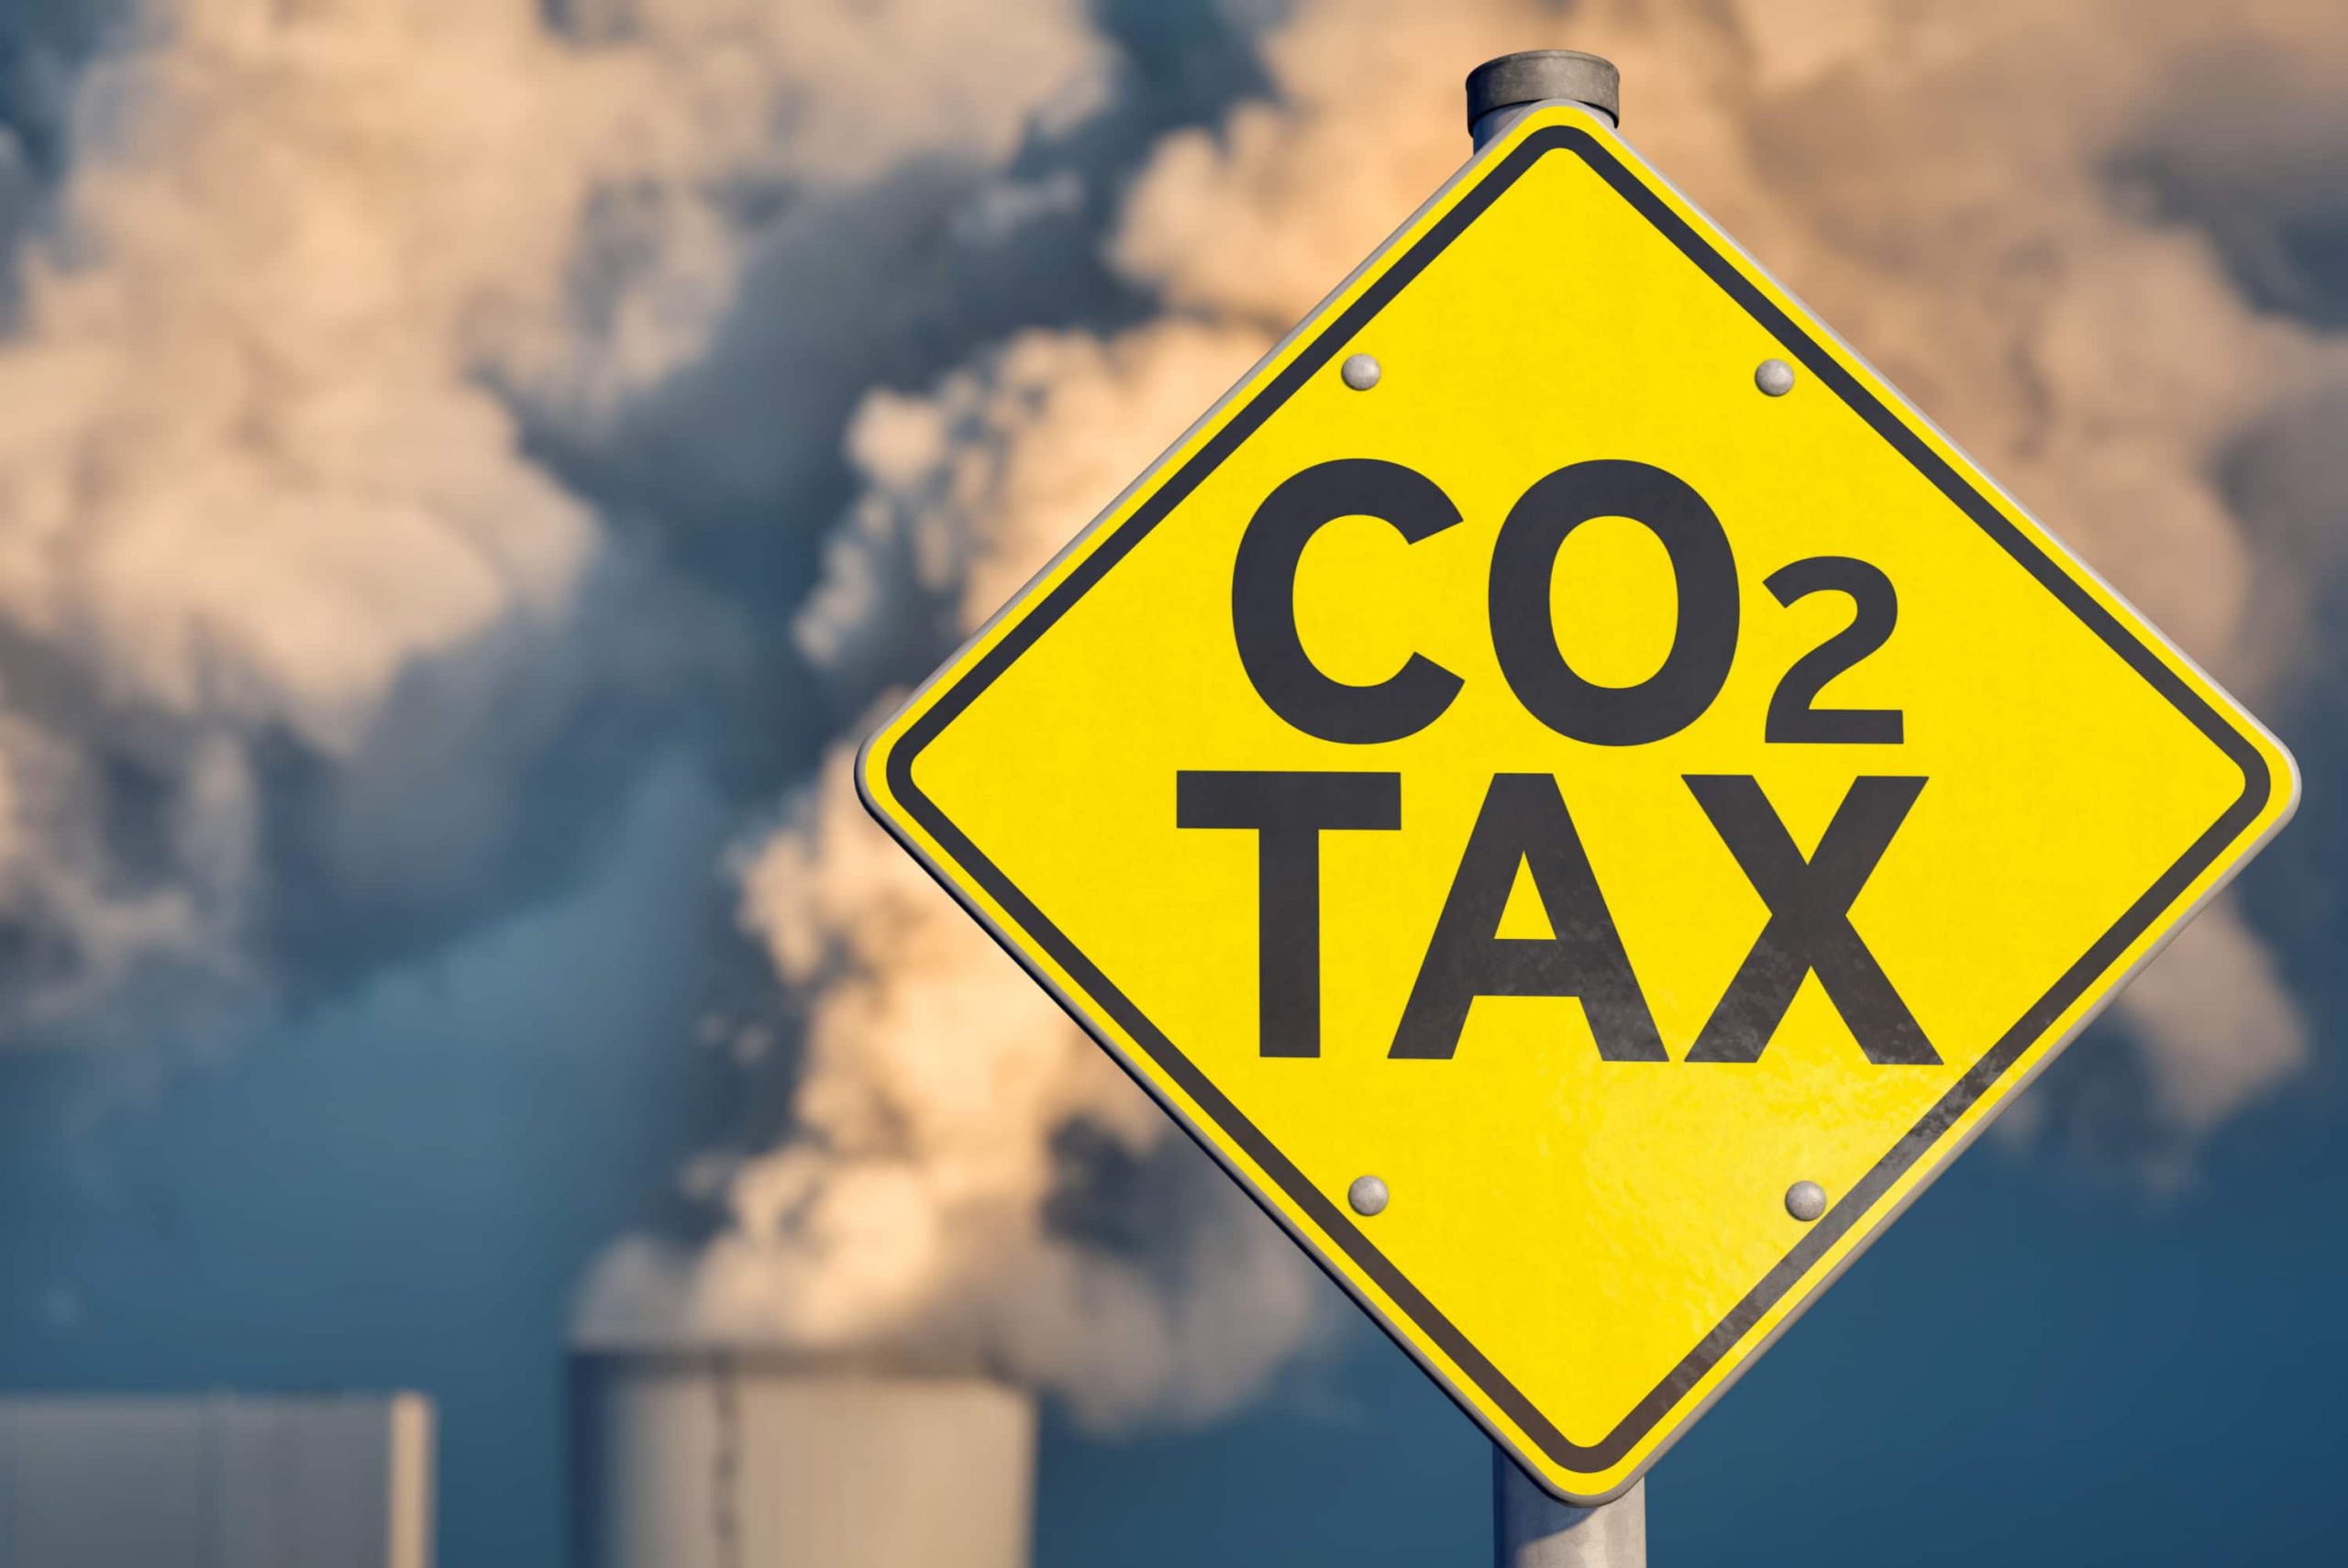 Dates For Carbon Tax Rebate